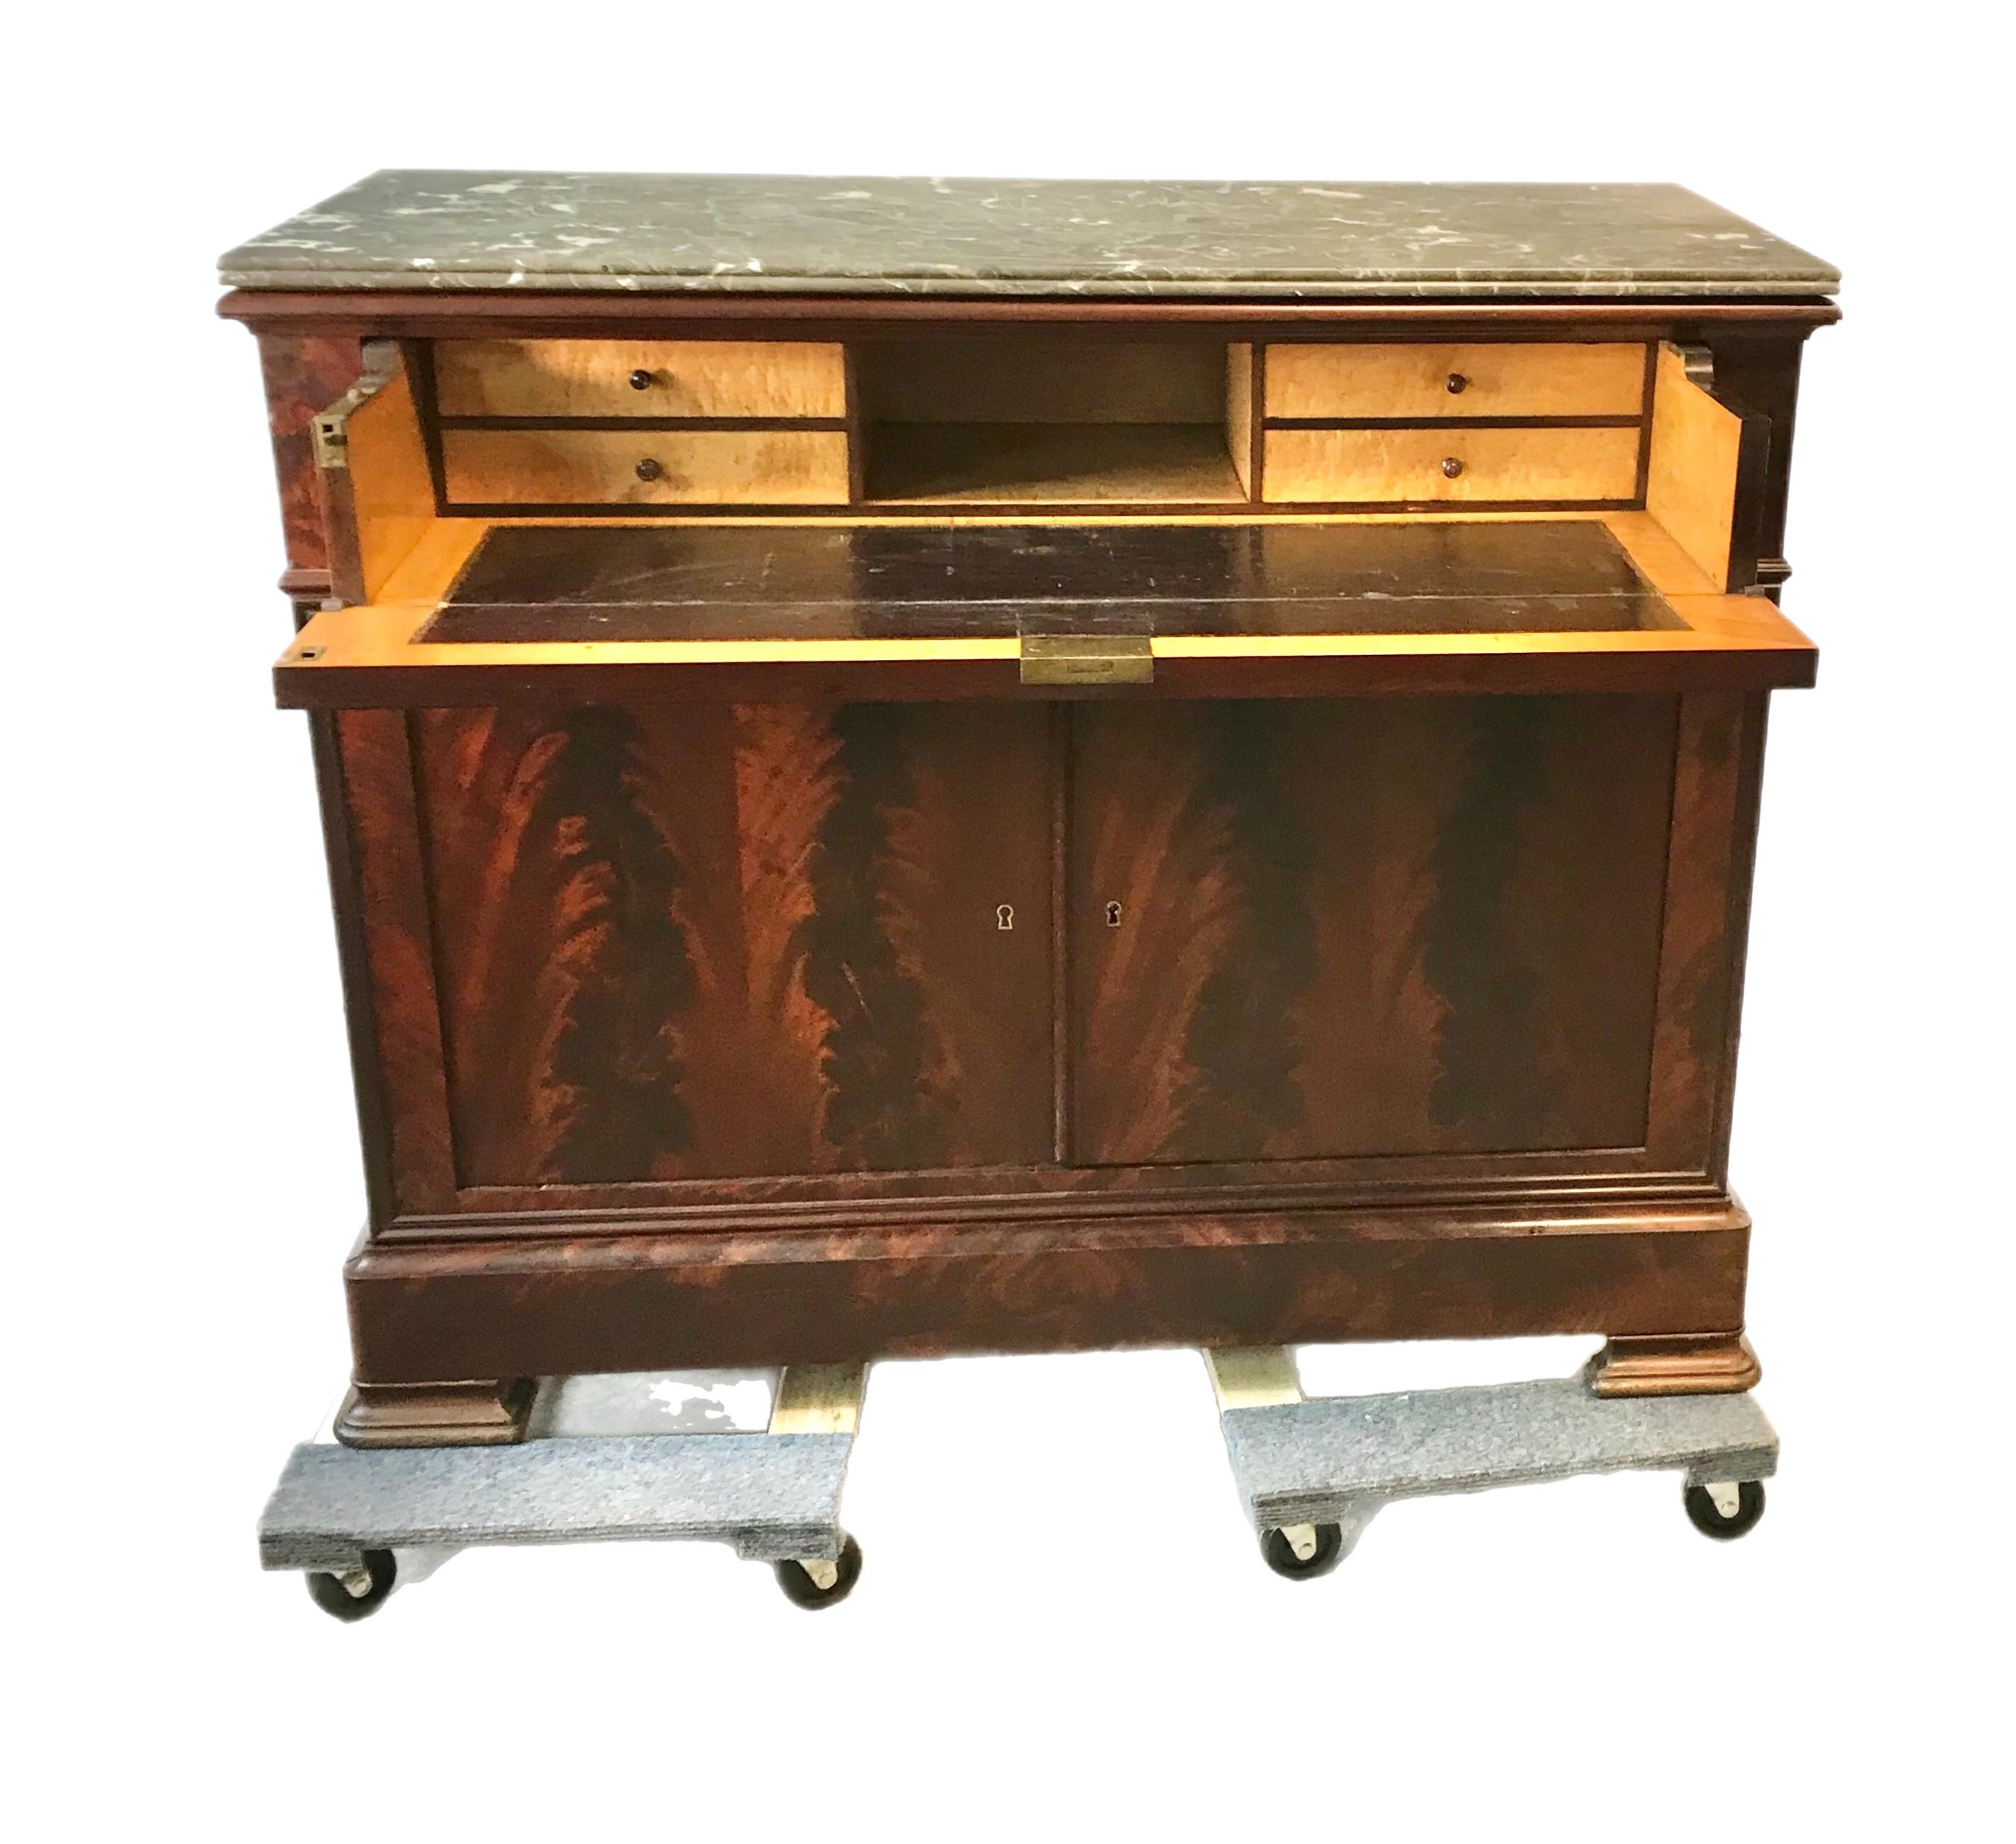 This Butlers desk features a flame mahogany veneer exterior with solid marble top. The interior opens to a desk with a stunning birdseye maple veneer finish and leather inlay writing surface. The lower compartment features 3 linen drawers with